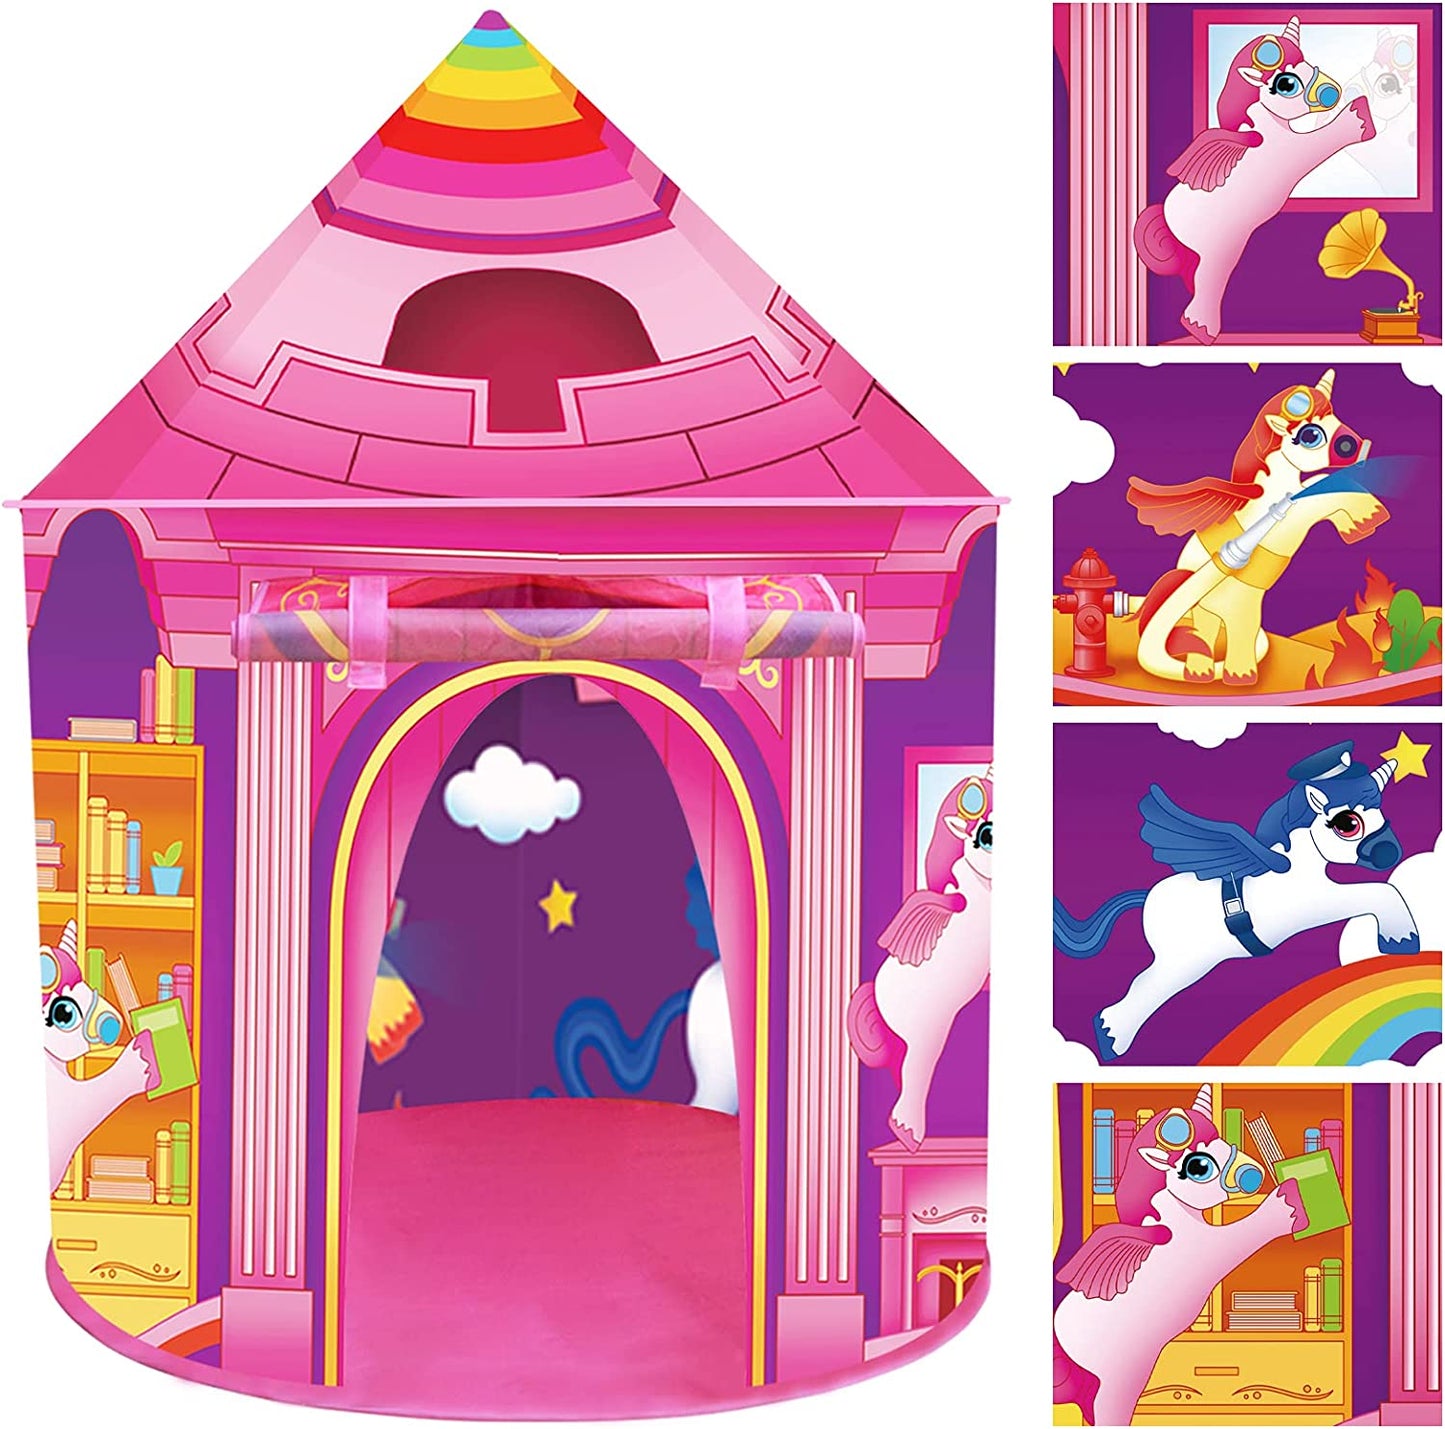 Princess Tent Girls Unicorn Large Playhouse Kids Castle Play Tent with Star Lights Gift Toy for Children Indoor and Outdoor Games